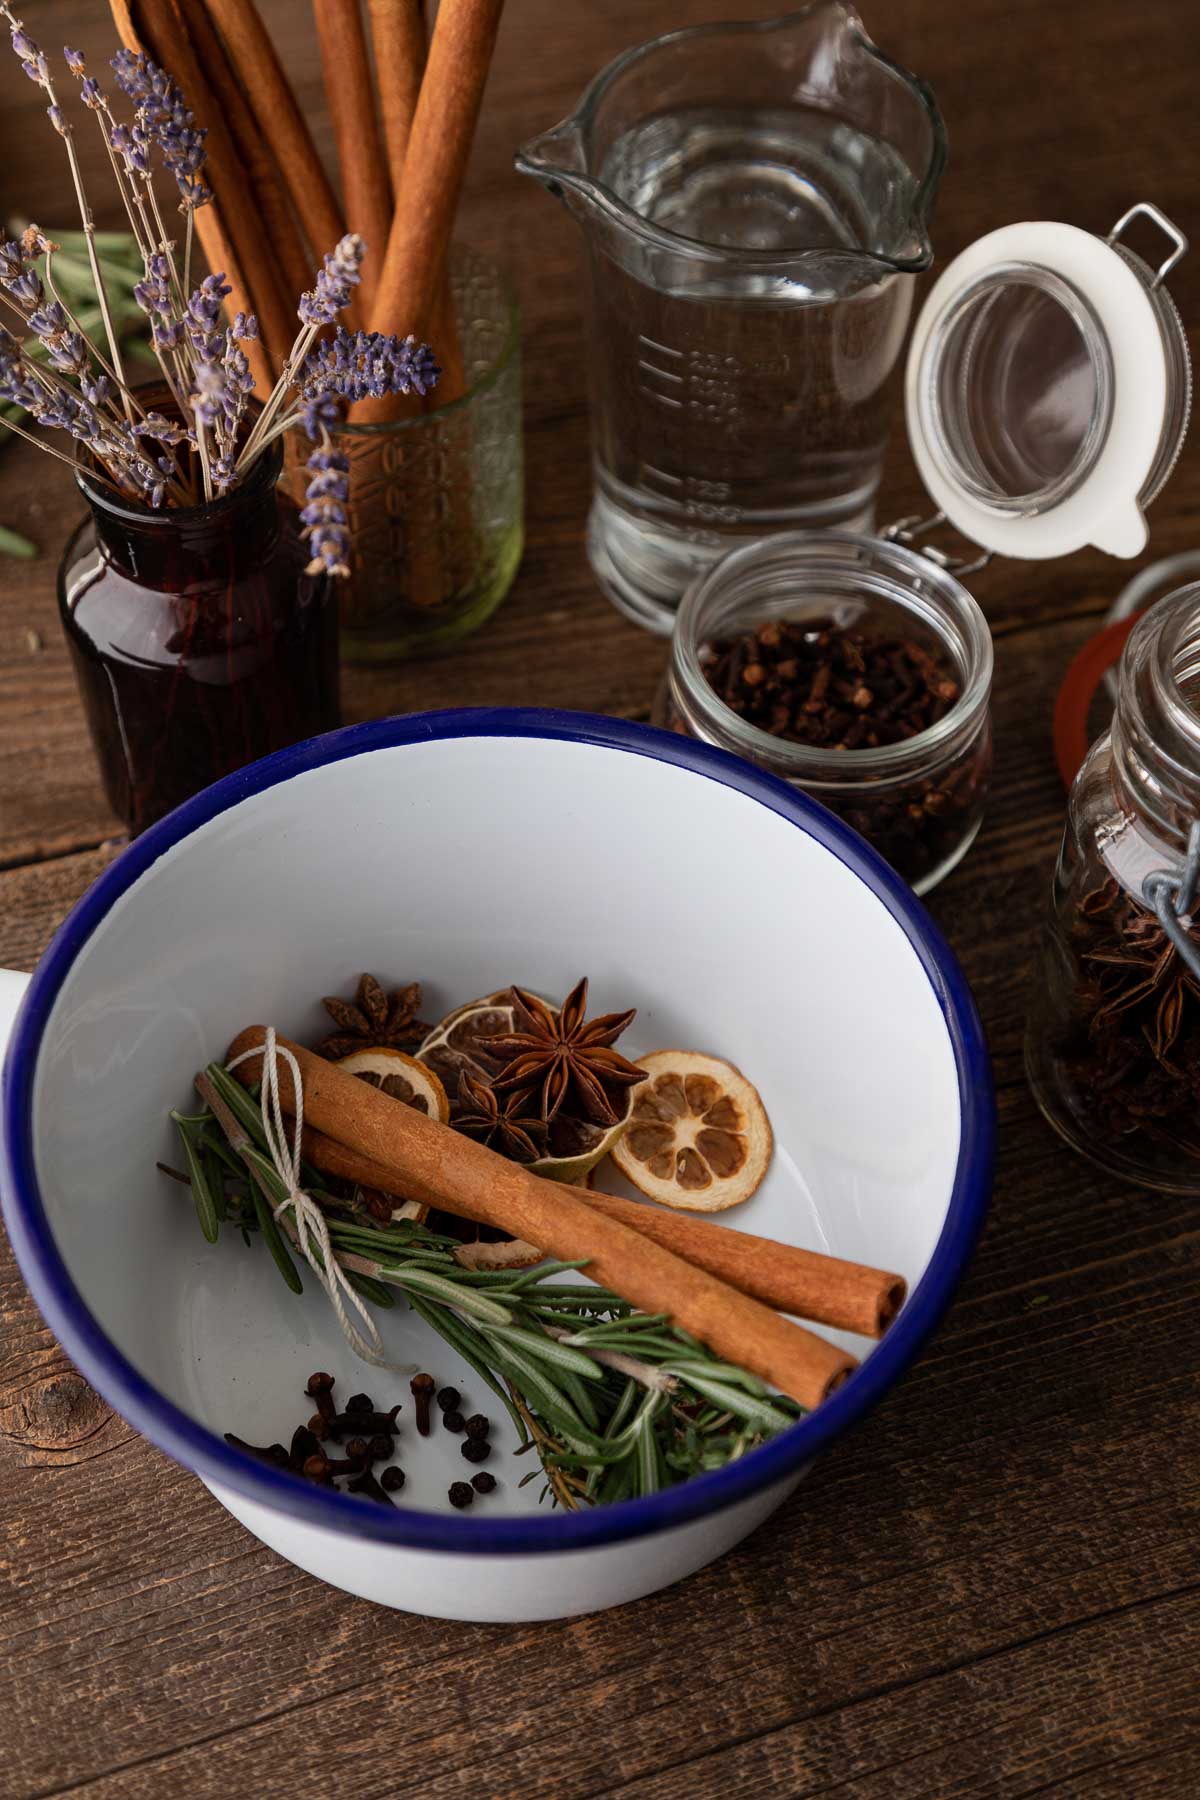 Stovetop Air Freshener - pot with cinnamon sticks, star anise, rosemary, and dried orange slices